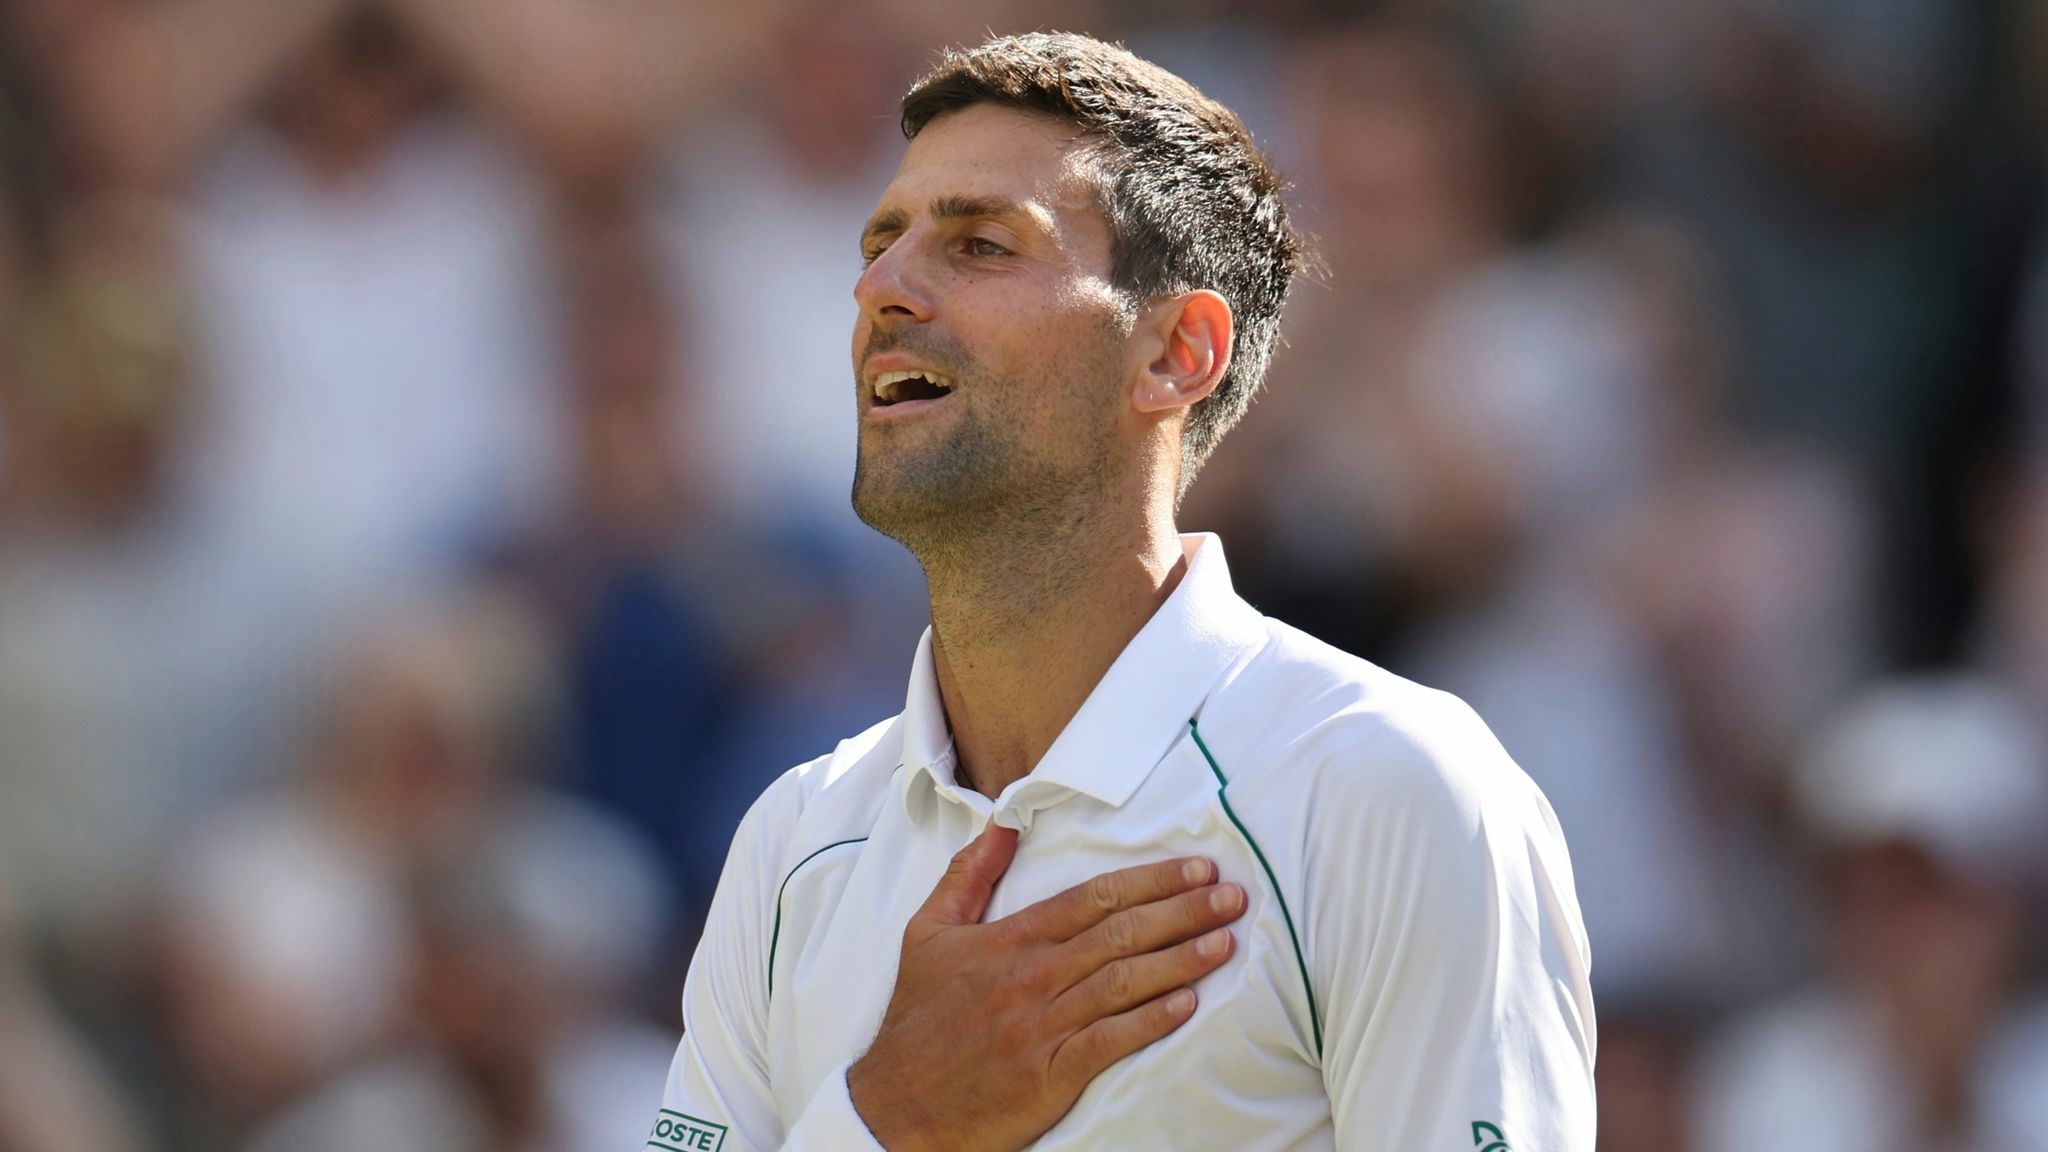 Wimbledon: Champion Novak Djokovic is hoping for a change in Covid rules ahead of the US Open